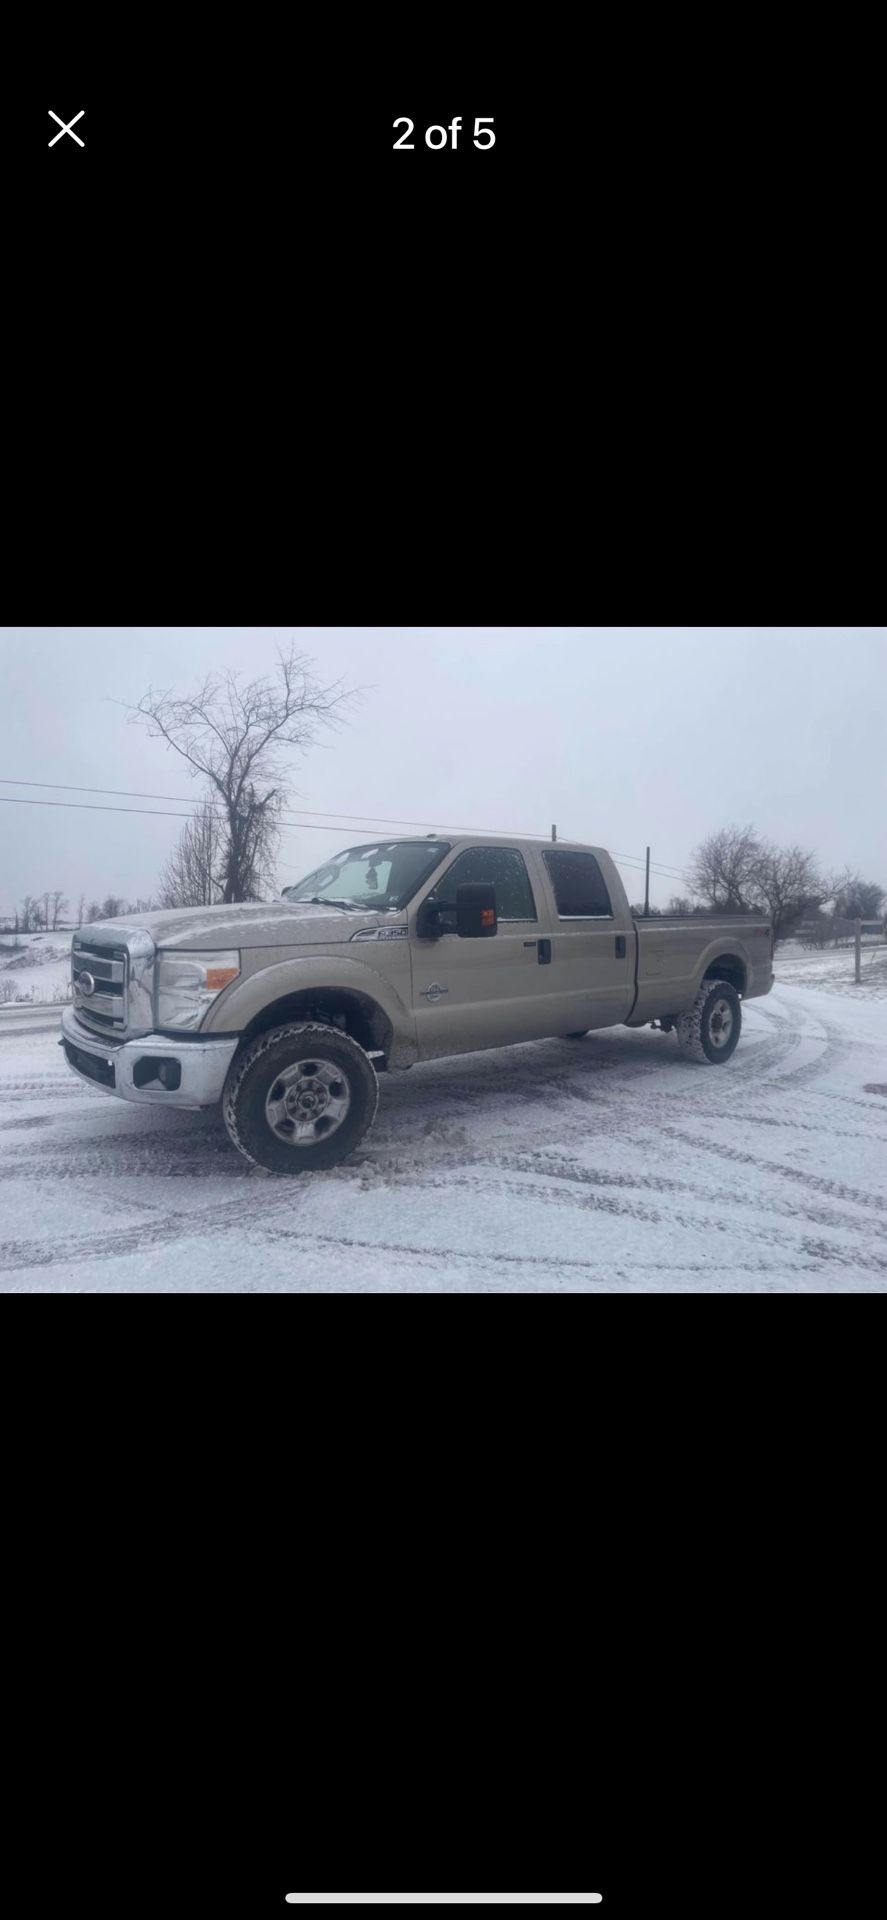 2012 F350 Wheels And Tires